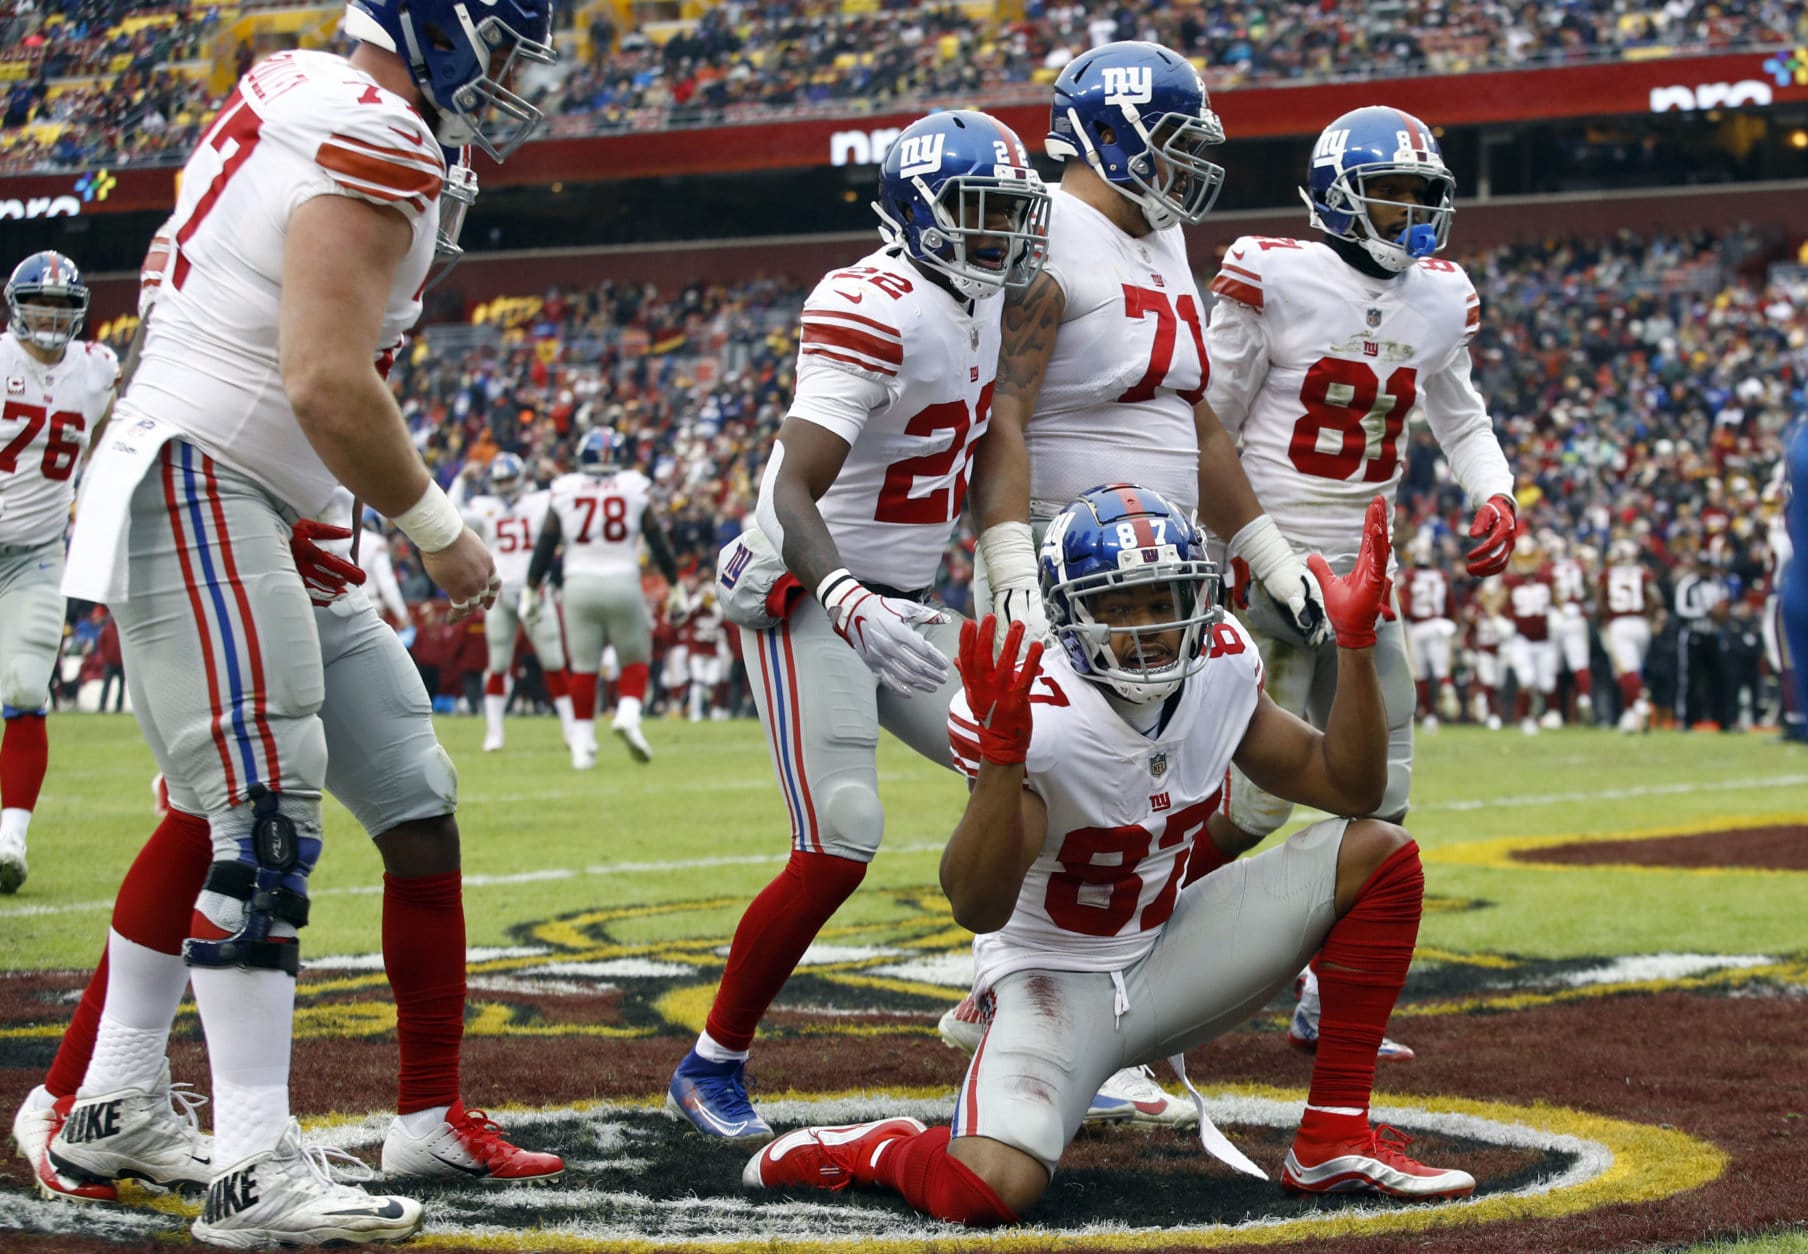 New York Giants wide receiver Sterling Shepard (87) celebrates his touchdown with teammates during the first half of an NFL football game against the Washington Redskins, Sunday, Dec. 9, 2018, in Landover, Md. (AP Photo/Patrick Semansky)